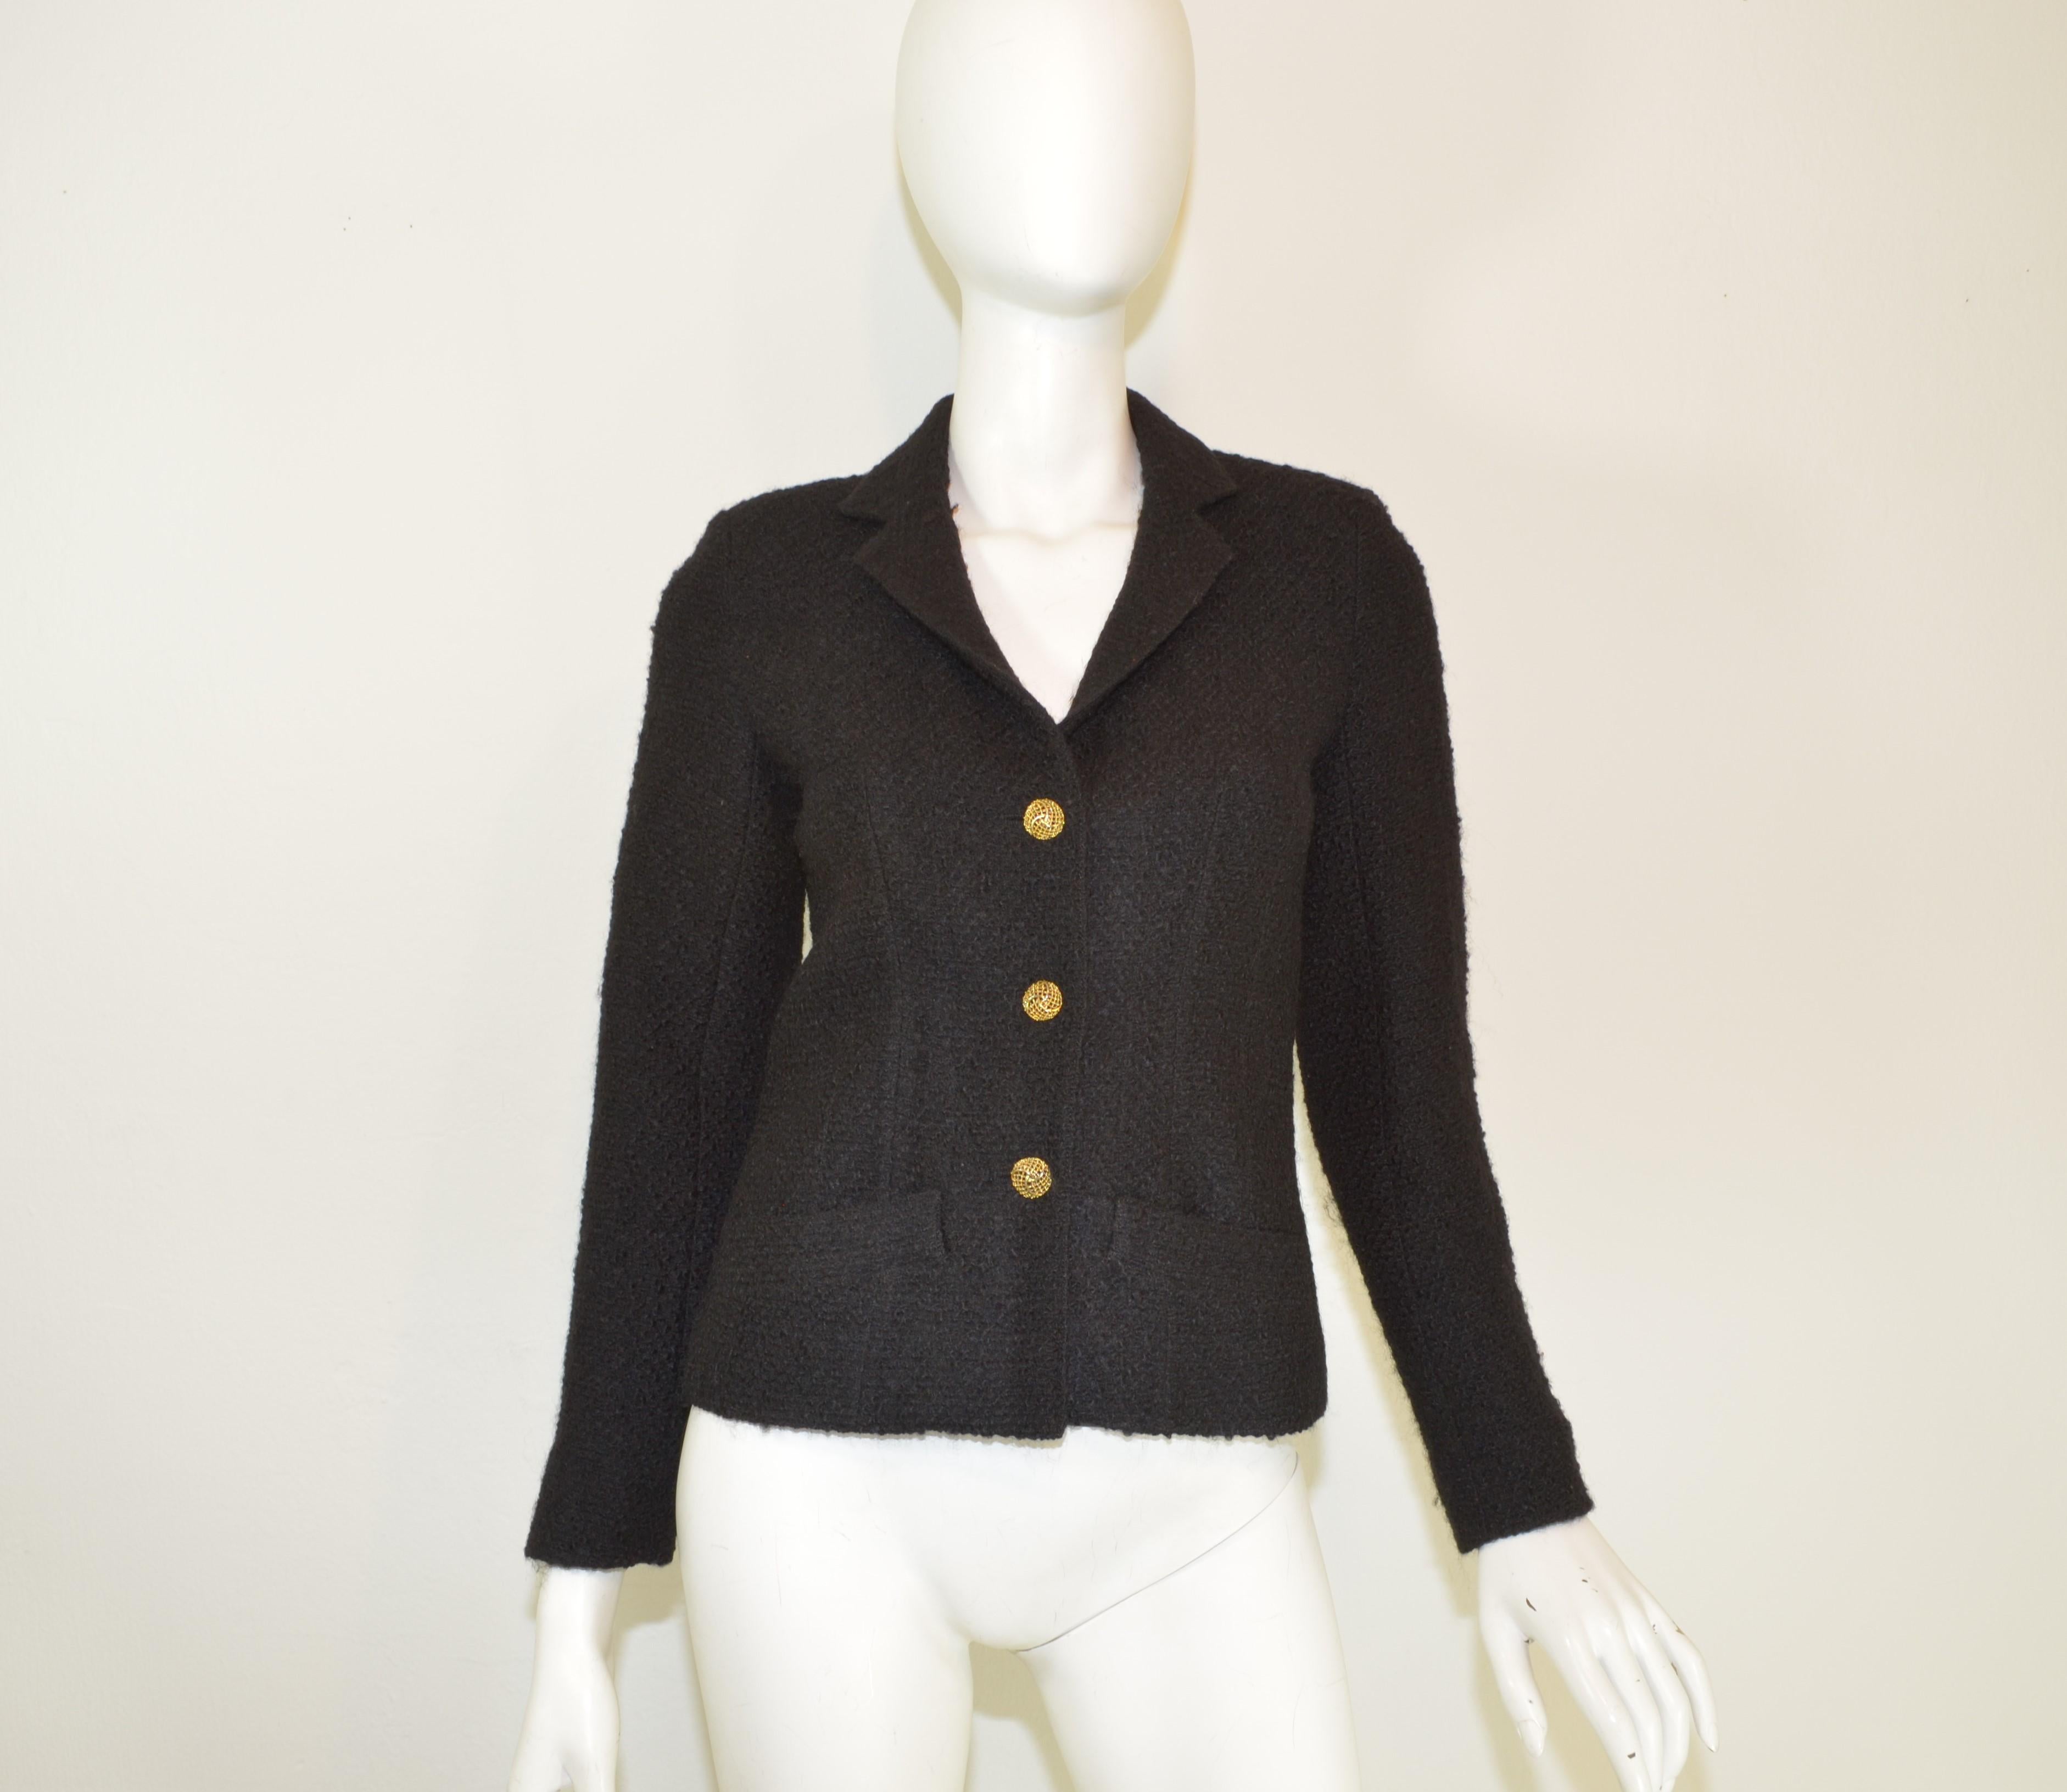 This classic, vintage Chanel (pre Karl Lagerfeld) jacket is featured in a black tweed knit with gold-tone button fastenings along the front and along the cuffs of the sleeves, pockets at the waist, and a full lining.

Excellent condition with no